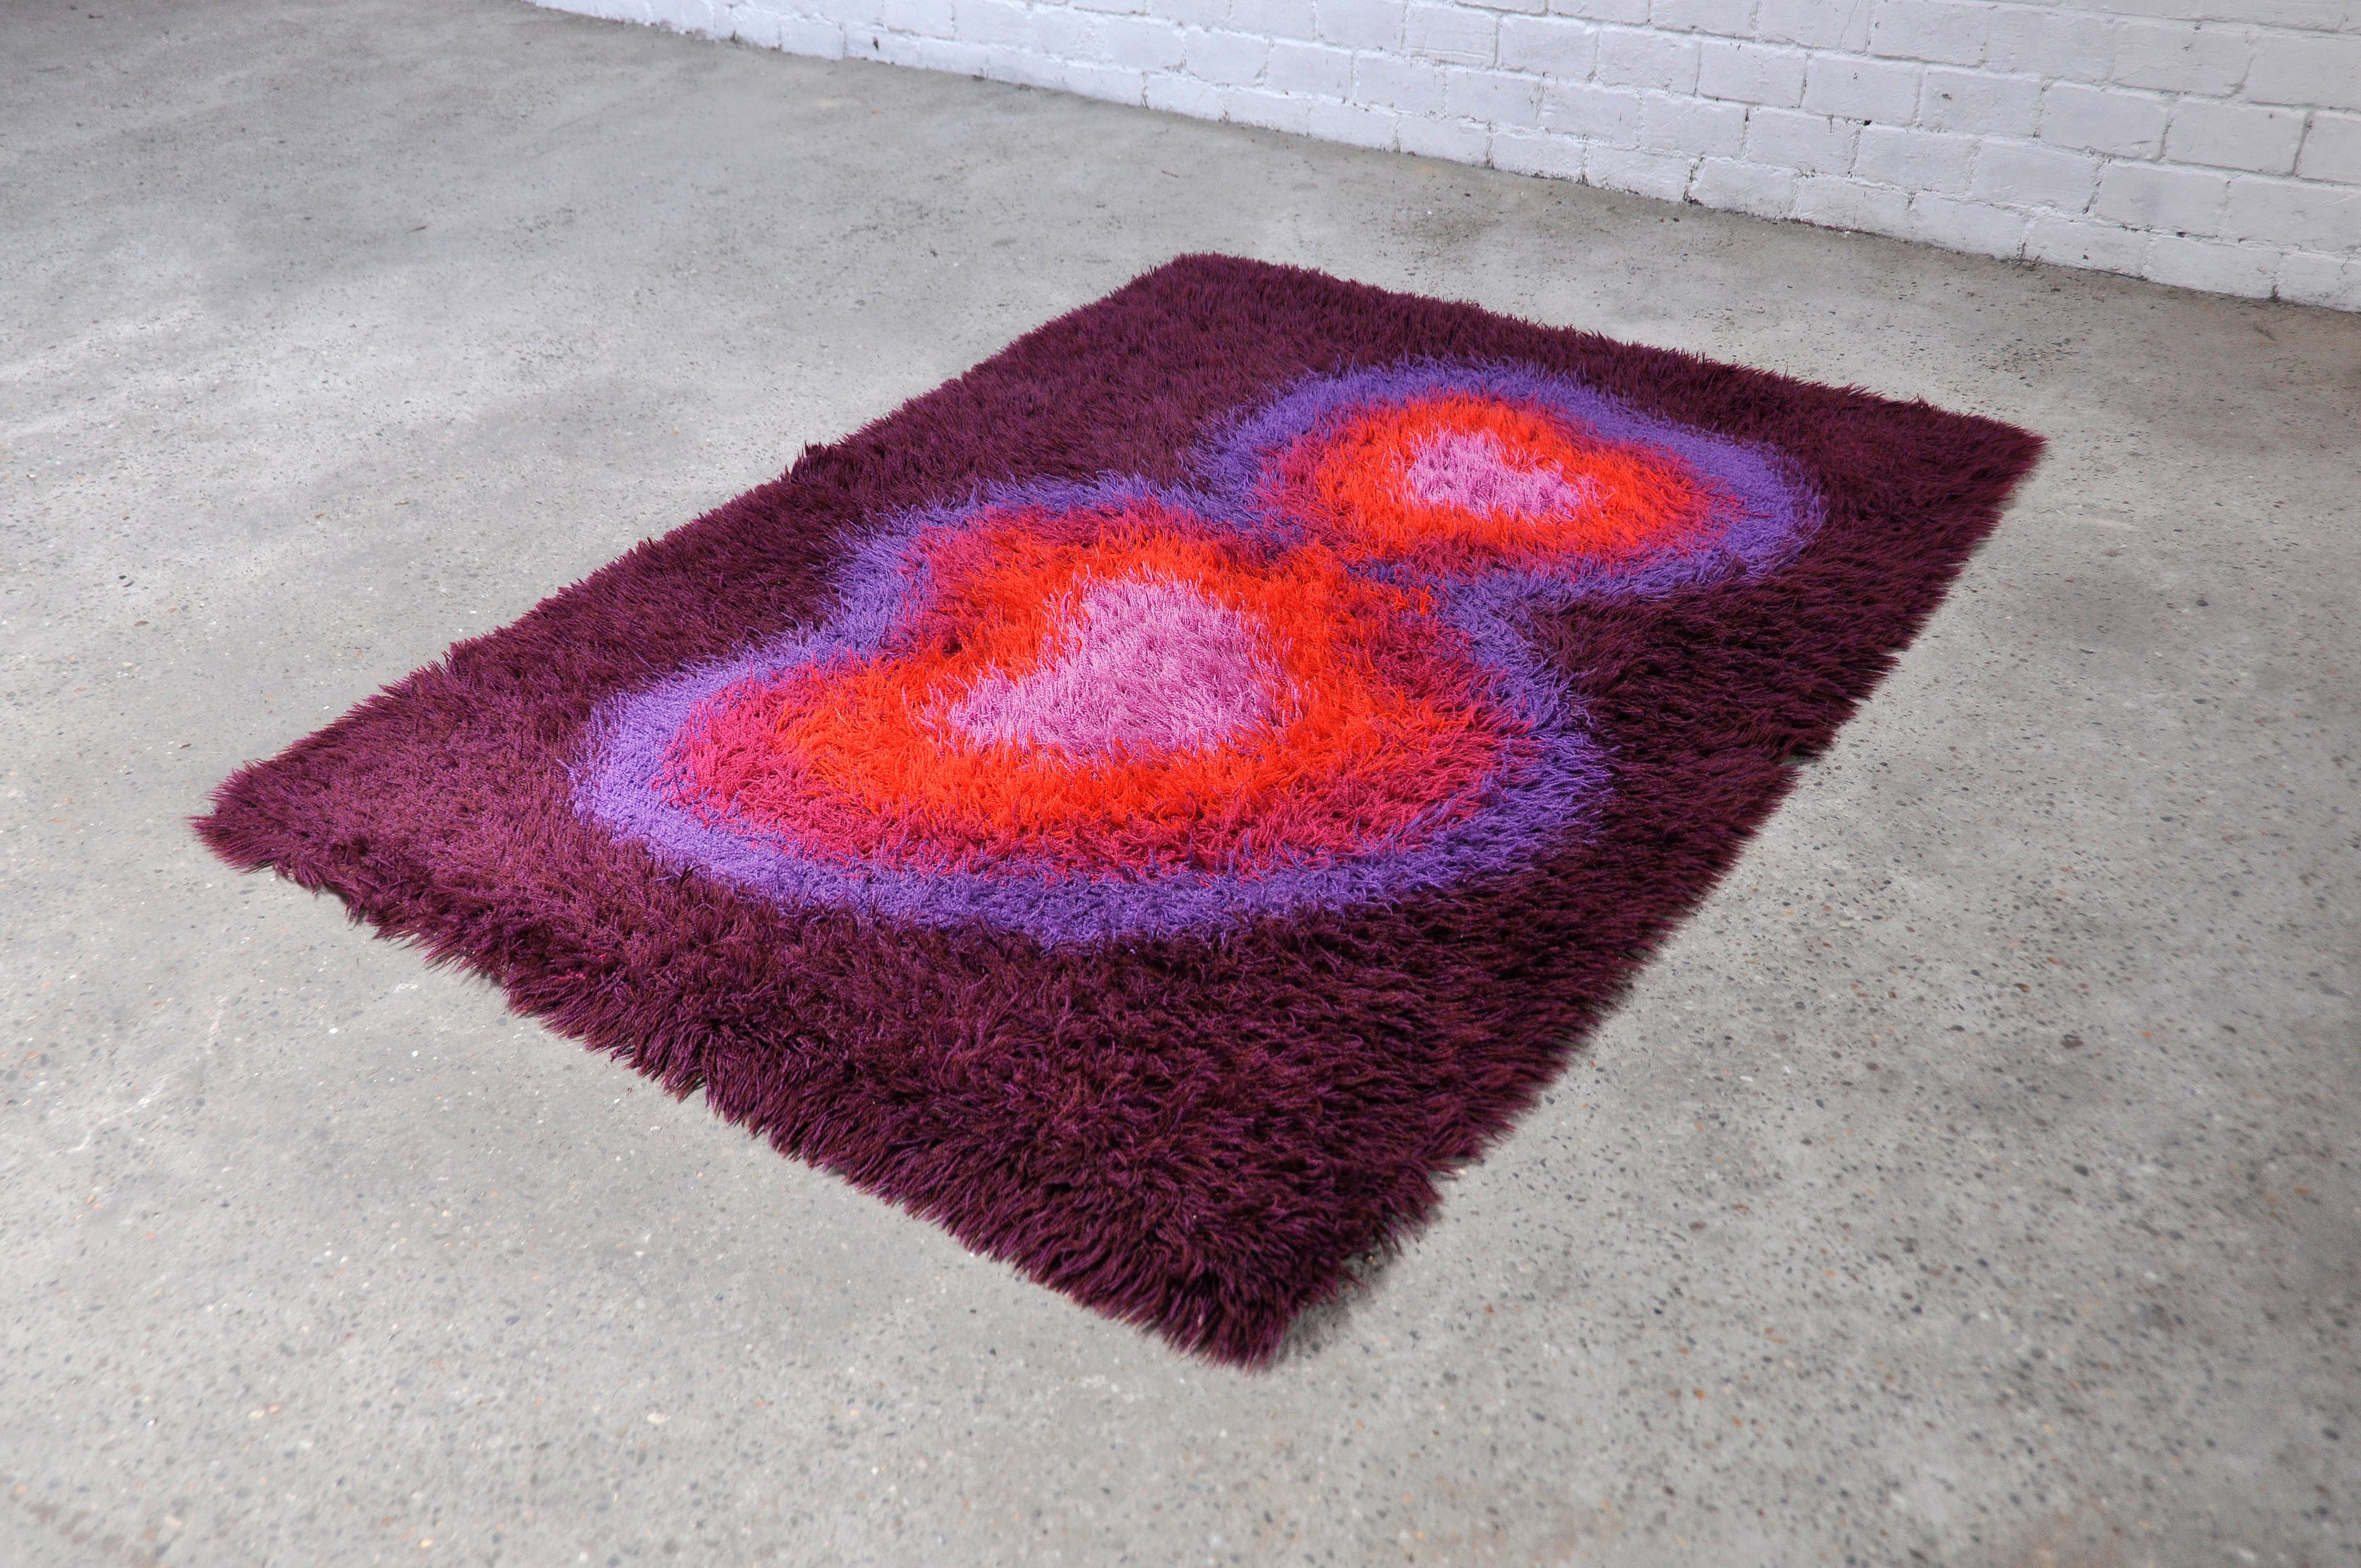 Beautiful thick pile ‘Rya De Luxe’ rug from Ege Tappear out of Denmark. This rug was designed in 1972 by Carin Agner Nielsen and the model is named ''Lugano''. This specific model is one of the most sought after scandinavian rugs from the 70’s and